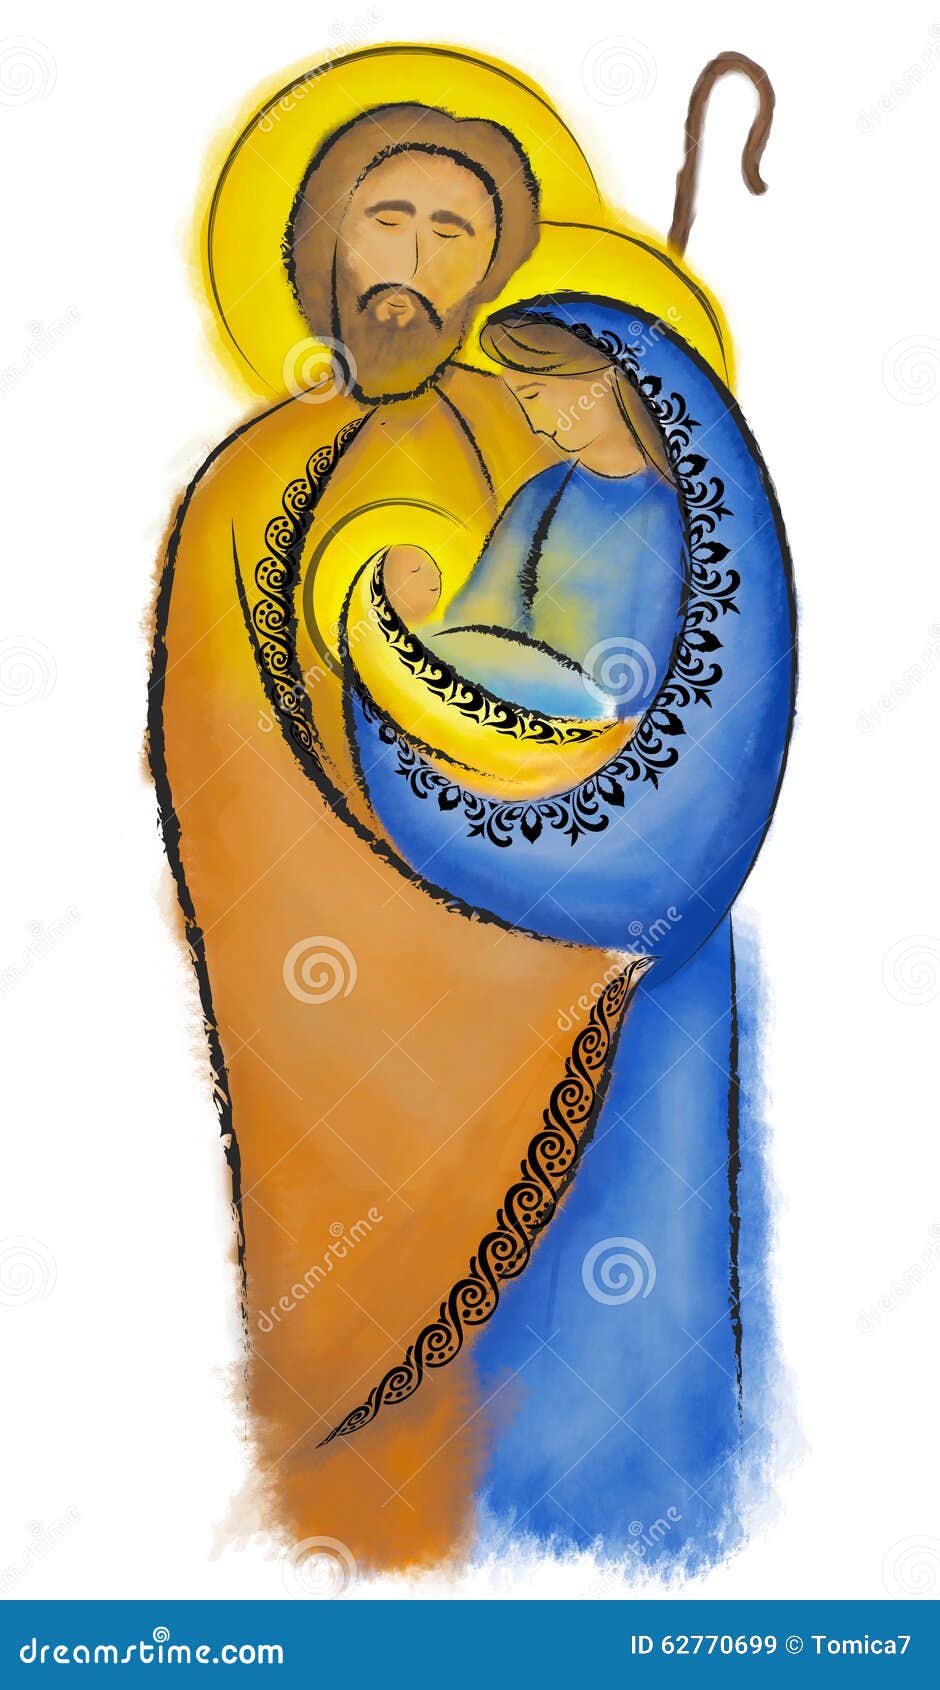 holy family clipart images - photo #41